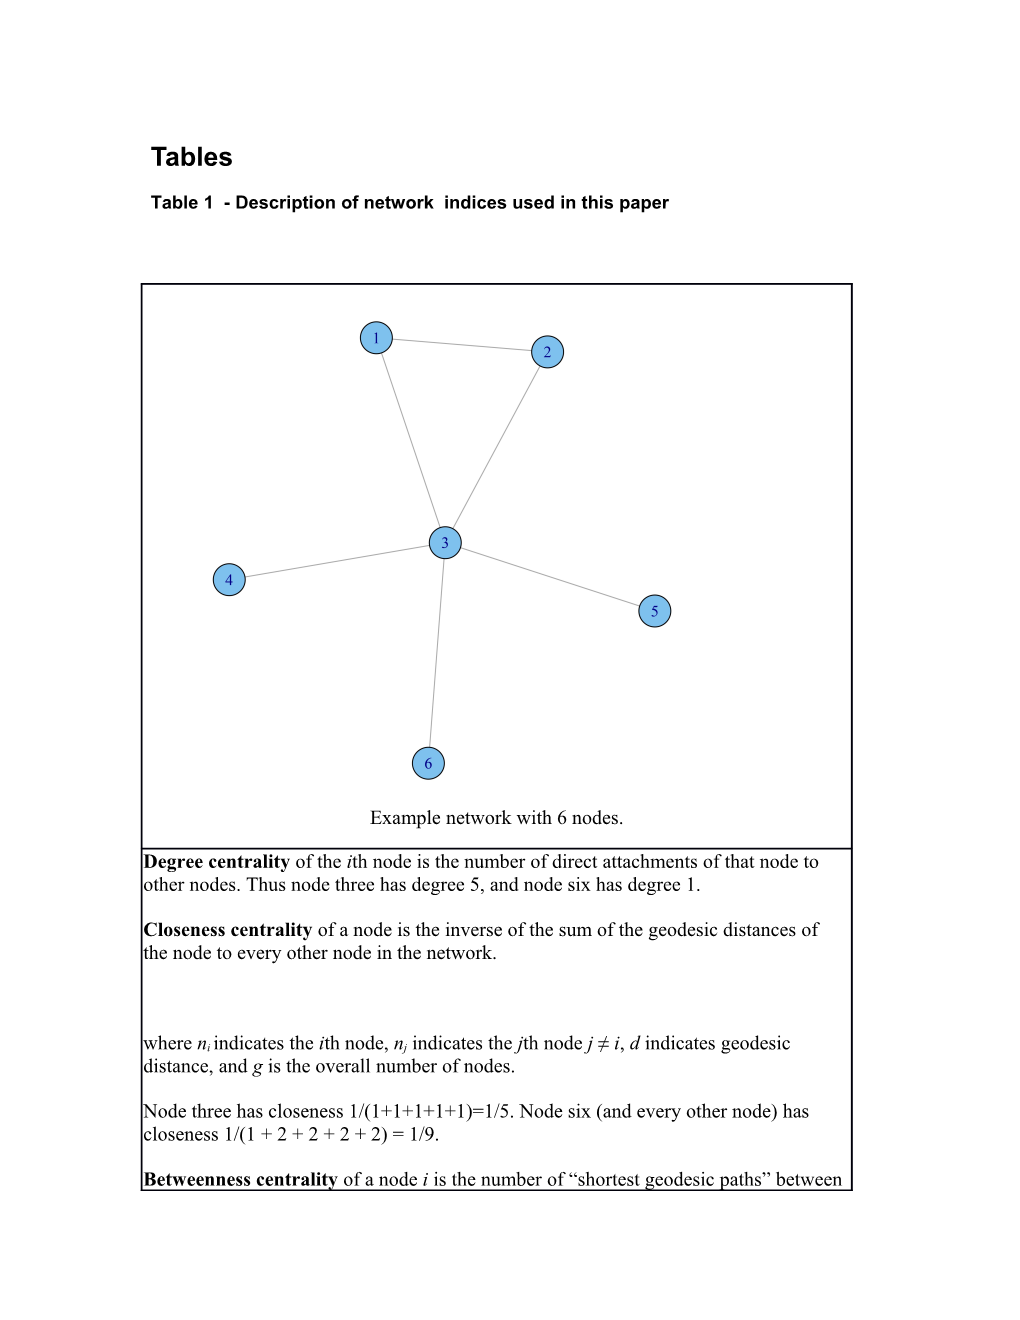 Table 1 - Description of Network Indices Used in This Paper